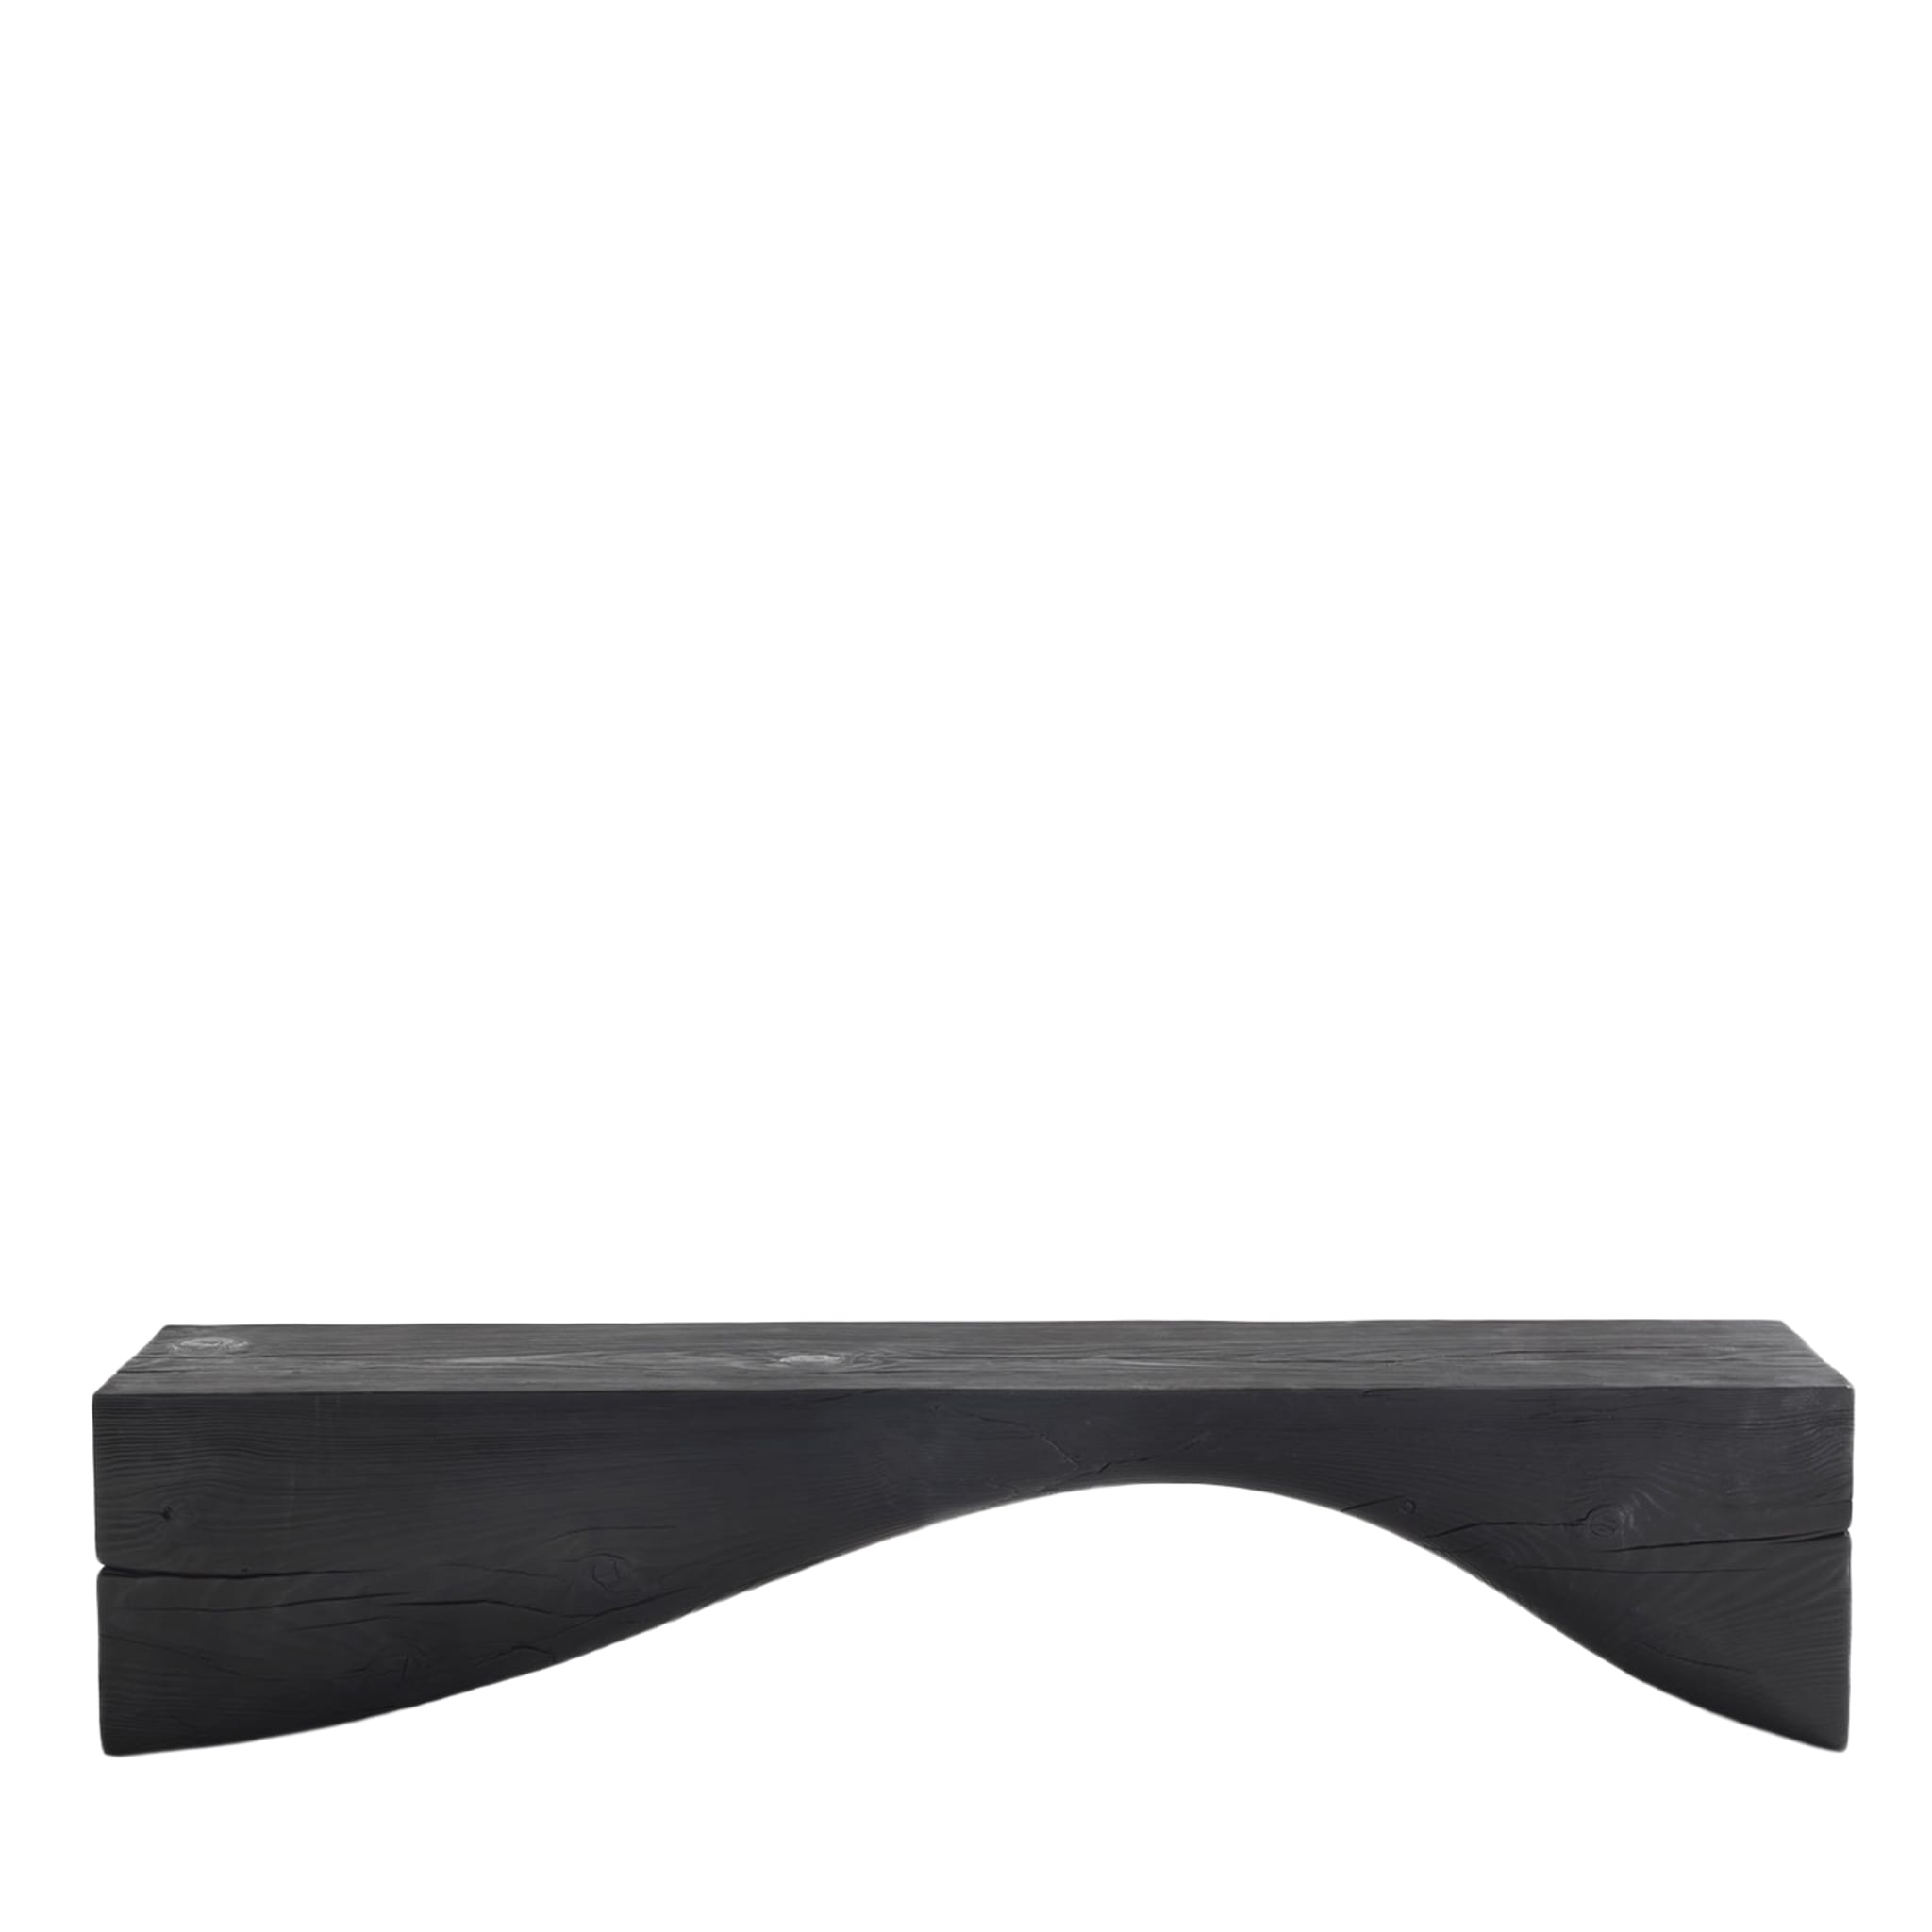 Curve Volcano-Black Bench by Brodie Neill - Main view